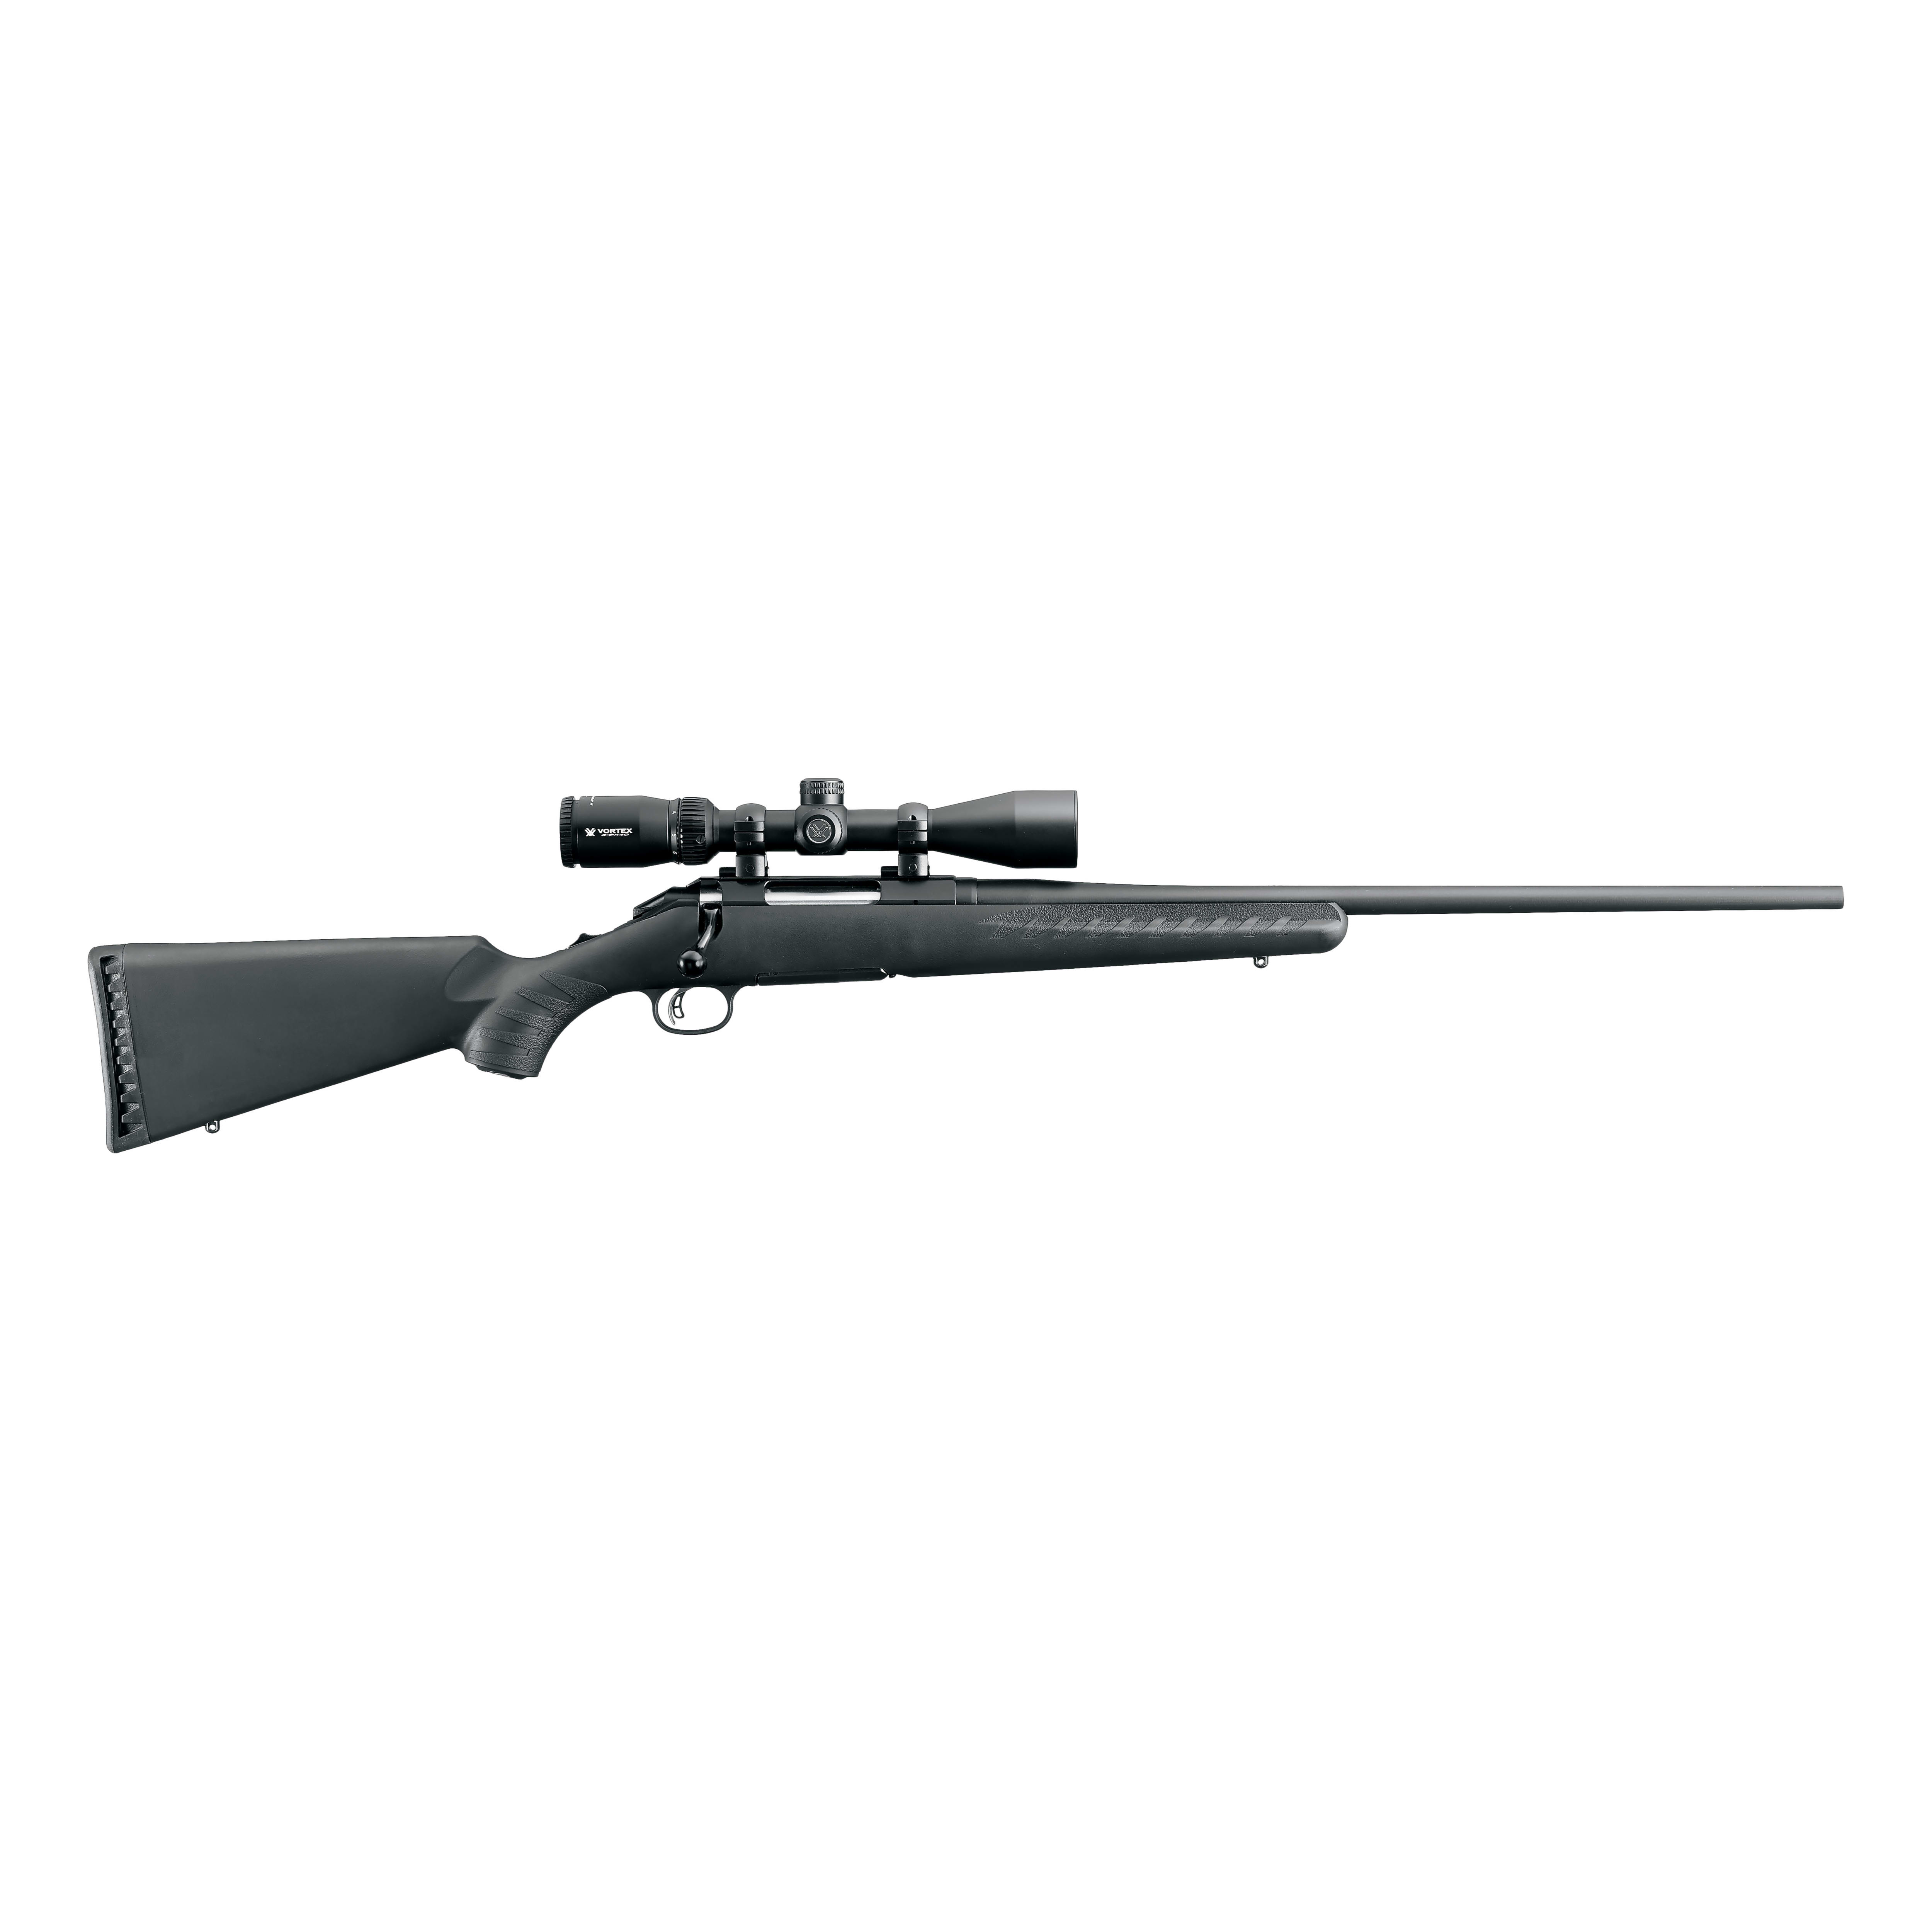 Ruger 16931 American Bolt-Action Rifle Combo 243 Win 22" Syn Matte w/ Vortex Crossfire II 3-9x40 riflescope, 0604-1812